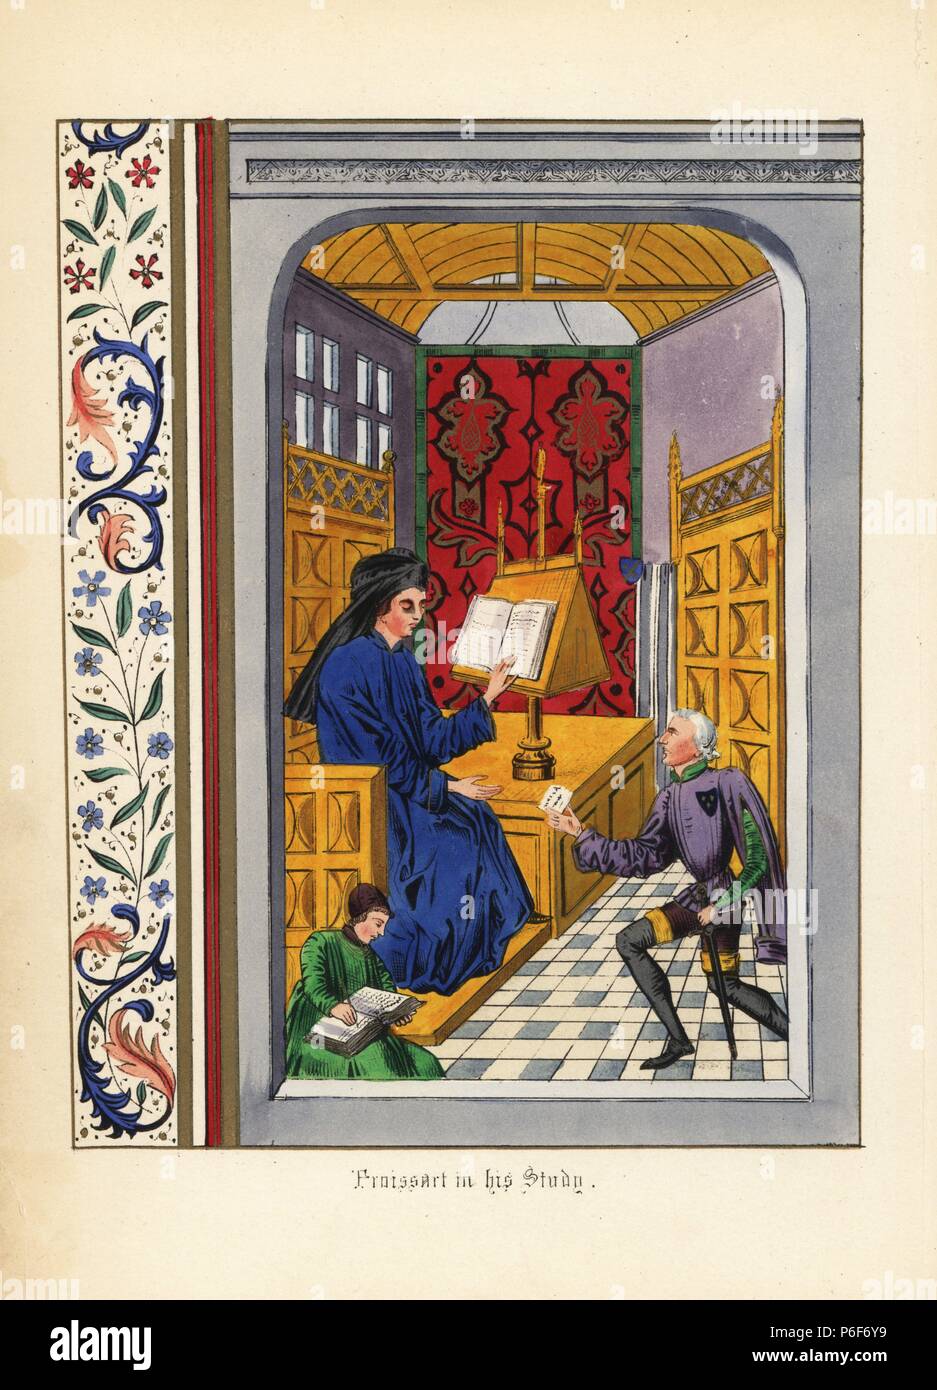 Sir John Froissart (c. 1337 – c. 1405) in his study reading a manuscript on a lectern. Handcoloured lithograph after an illuminated manuscript from Sir John Froissart's 'Chronicles of England, France, Spain and the Adjoining Countries, from the Latter Part of the Reign of Edward II to the Coronation of Henry IV,' George Routledge, London, 1868. Stock Photo